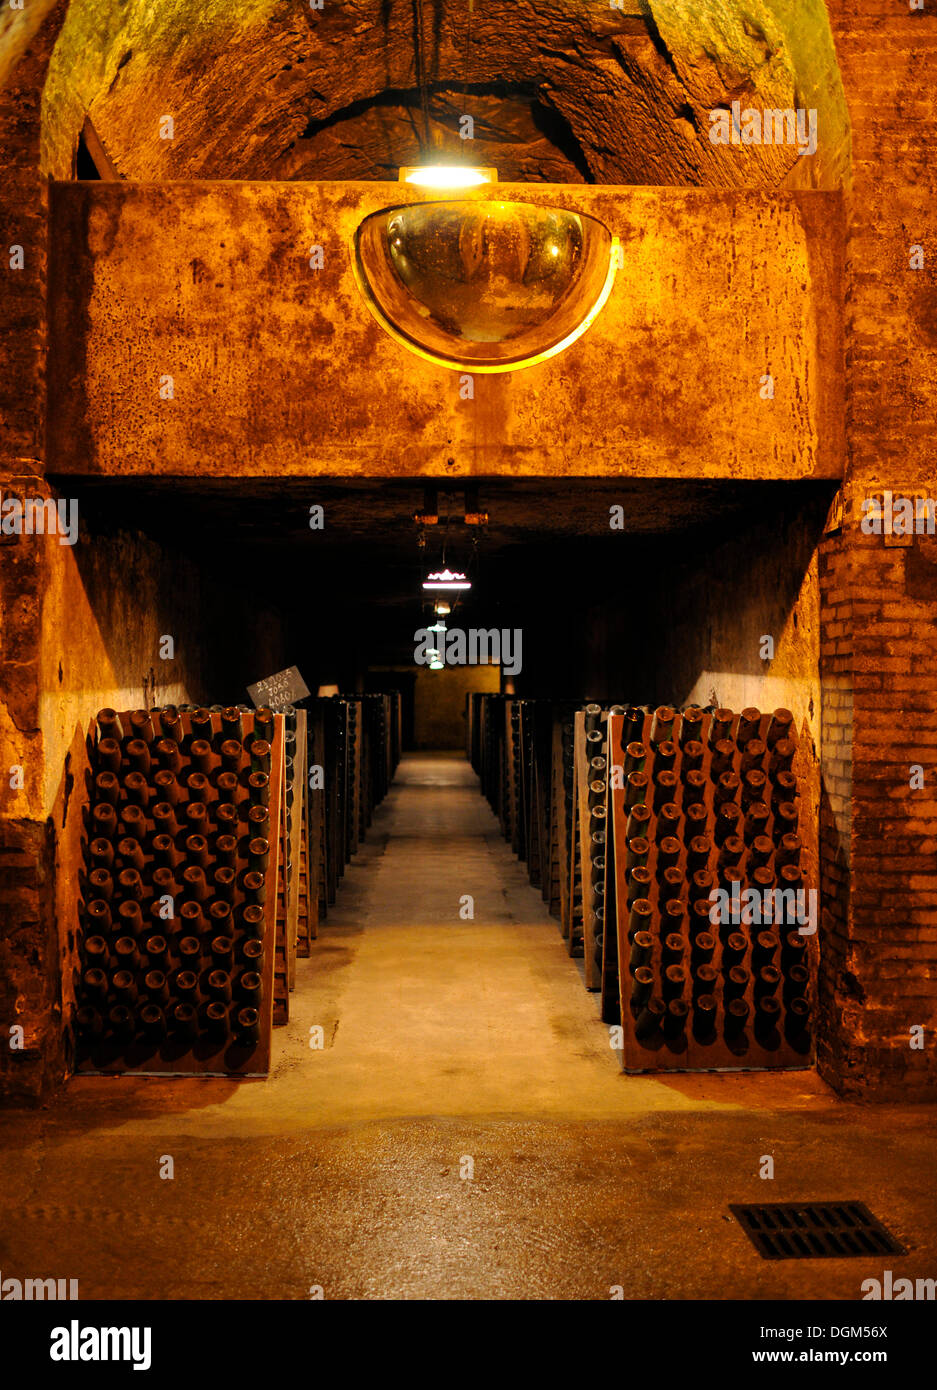 Champagne bottles are stored upside down for the deposition of sediments, wine cellar in limestone, Moet et Chandon winery Stock Photo